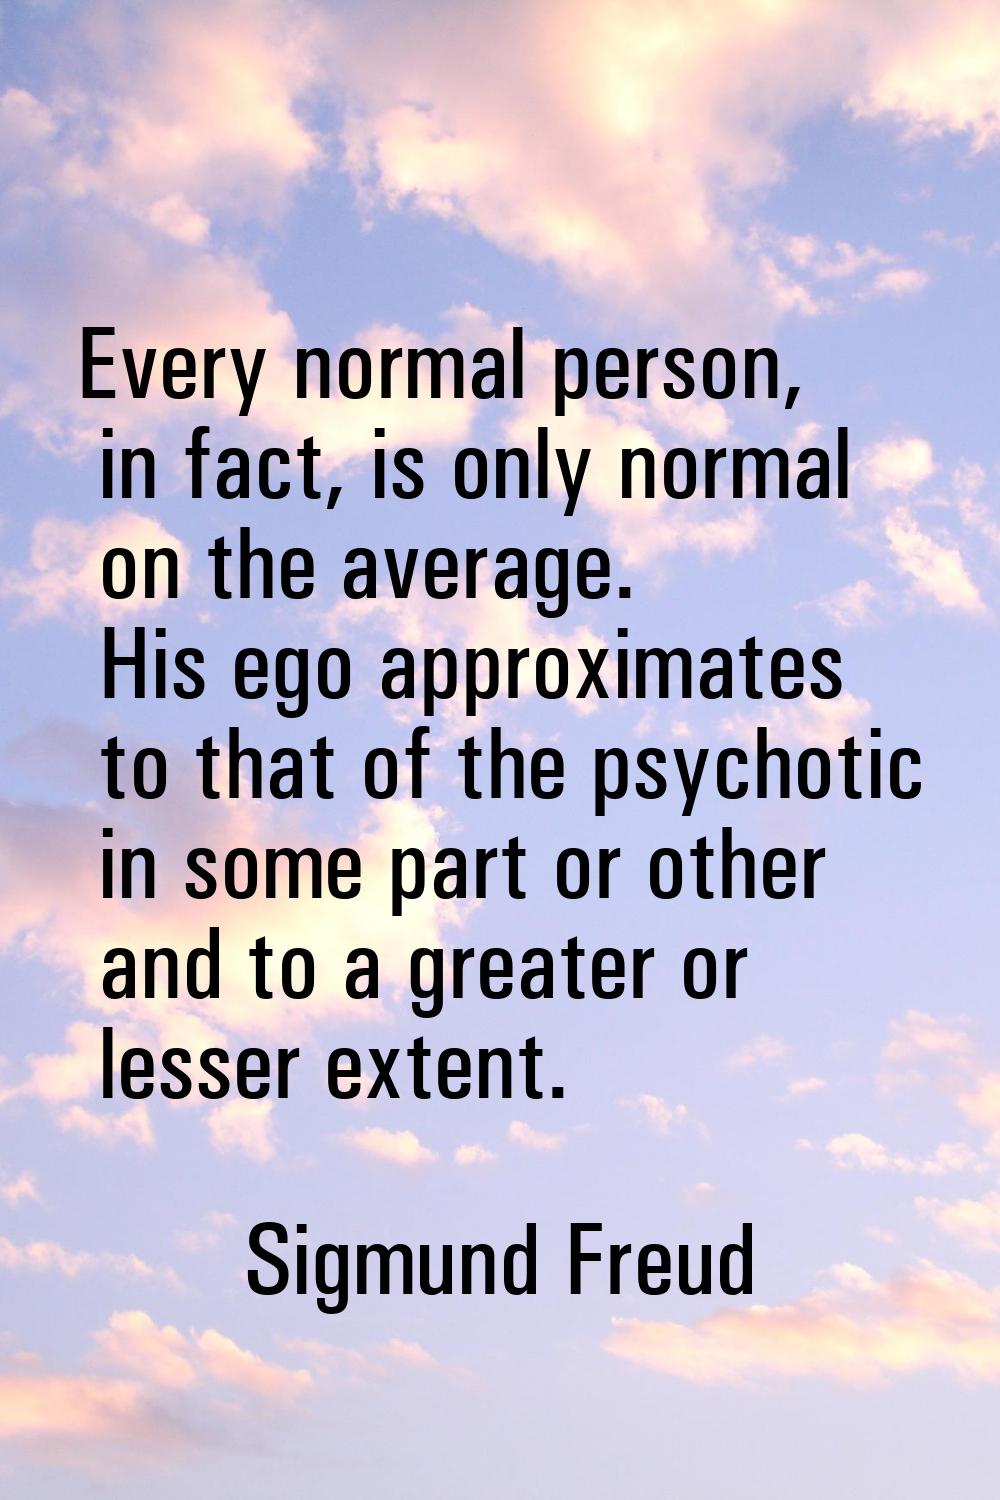 Every normal person, in fact, is only normal on the average. His ego approximates to that of the ps